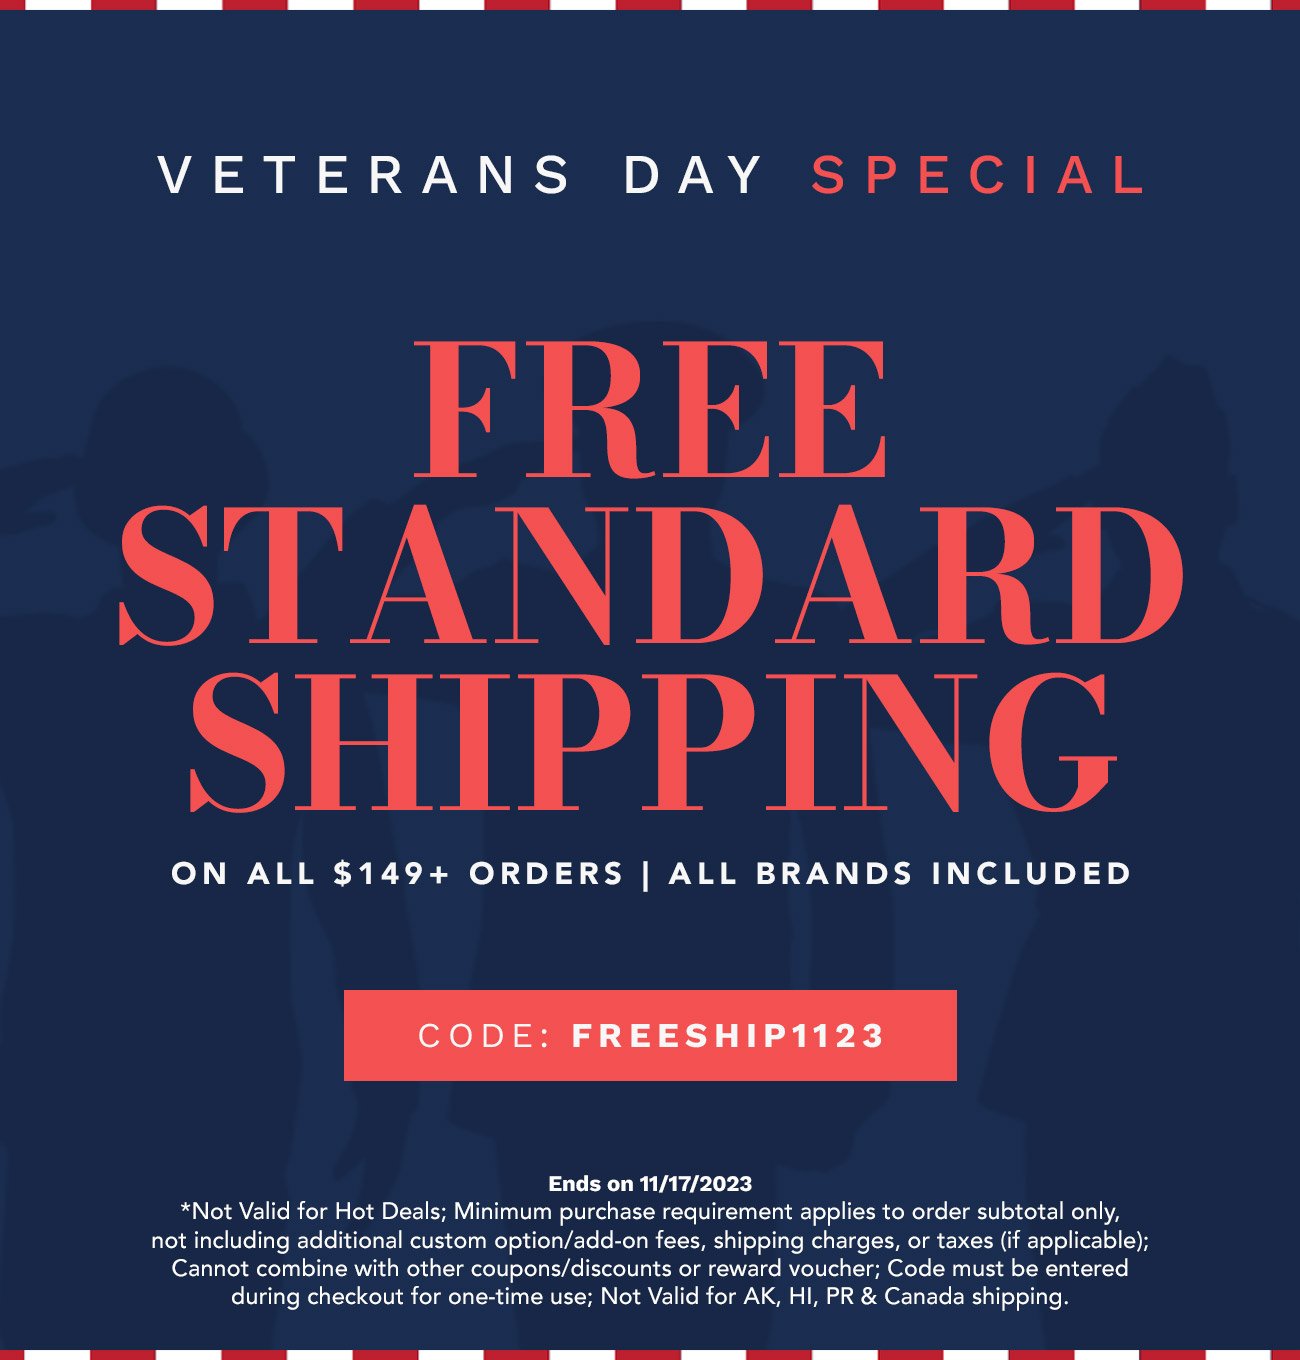 Veterans Day Special. FREE STANDARD SHIPPING on all 129+ Orders. Name Brands Excluded. CODE: FREESHIP1123.